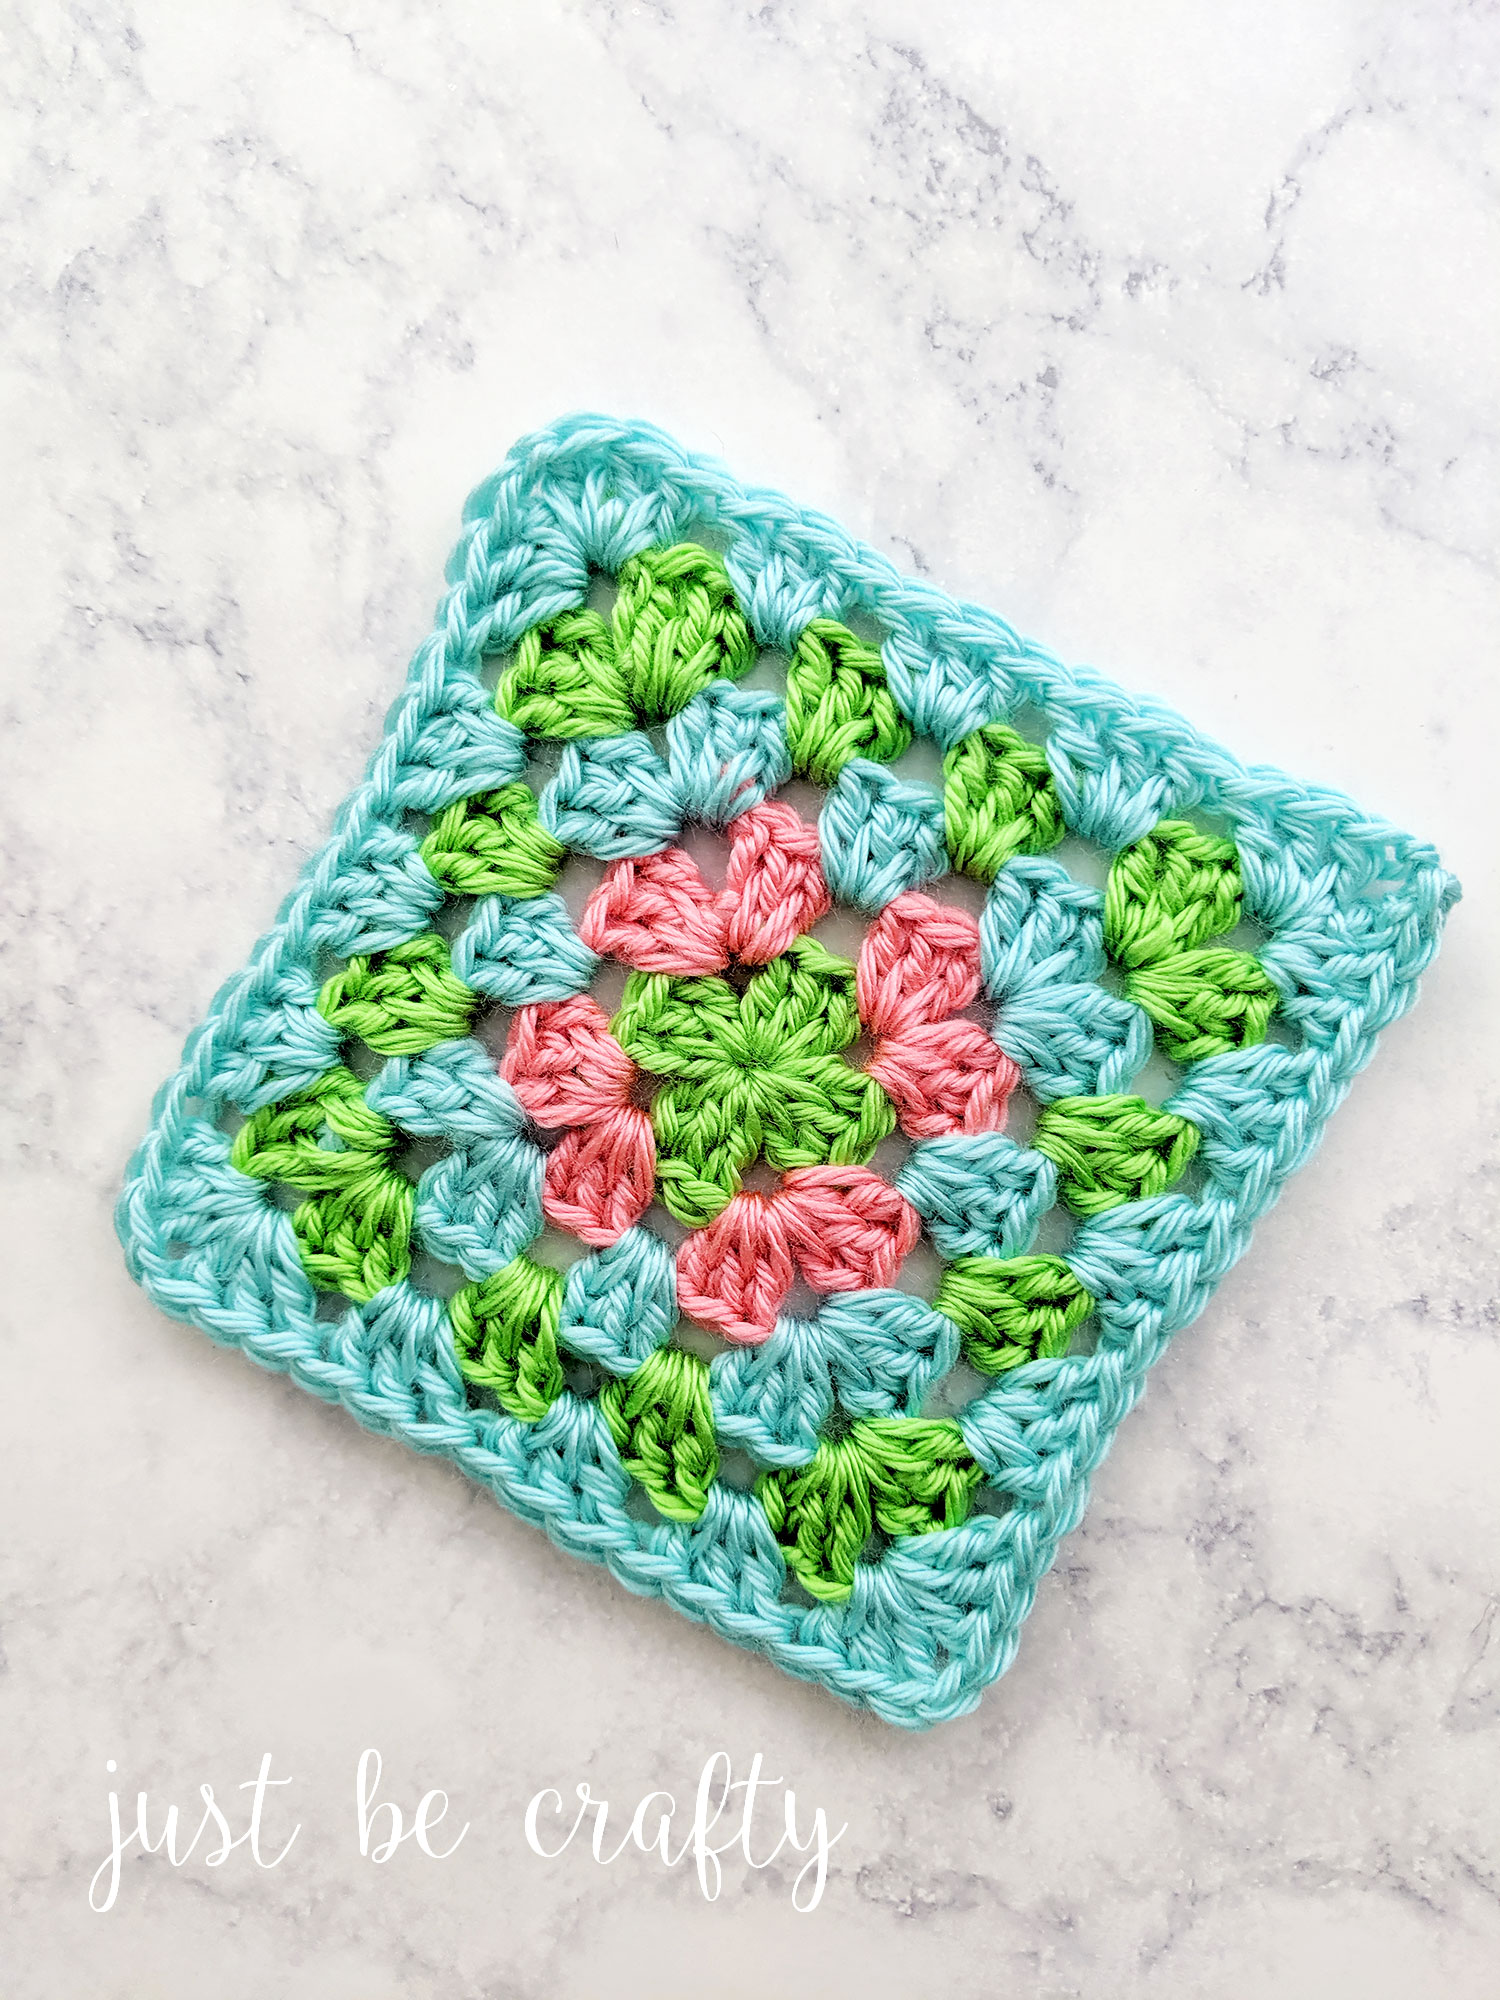 Granny Square Tutorial | Crochet Tutorial by Just Be Crafty